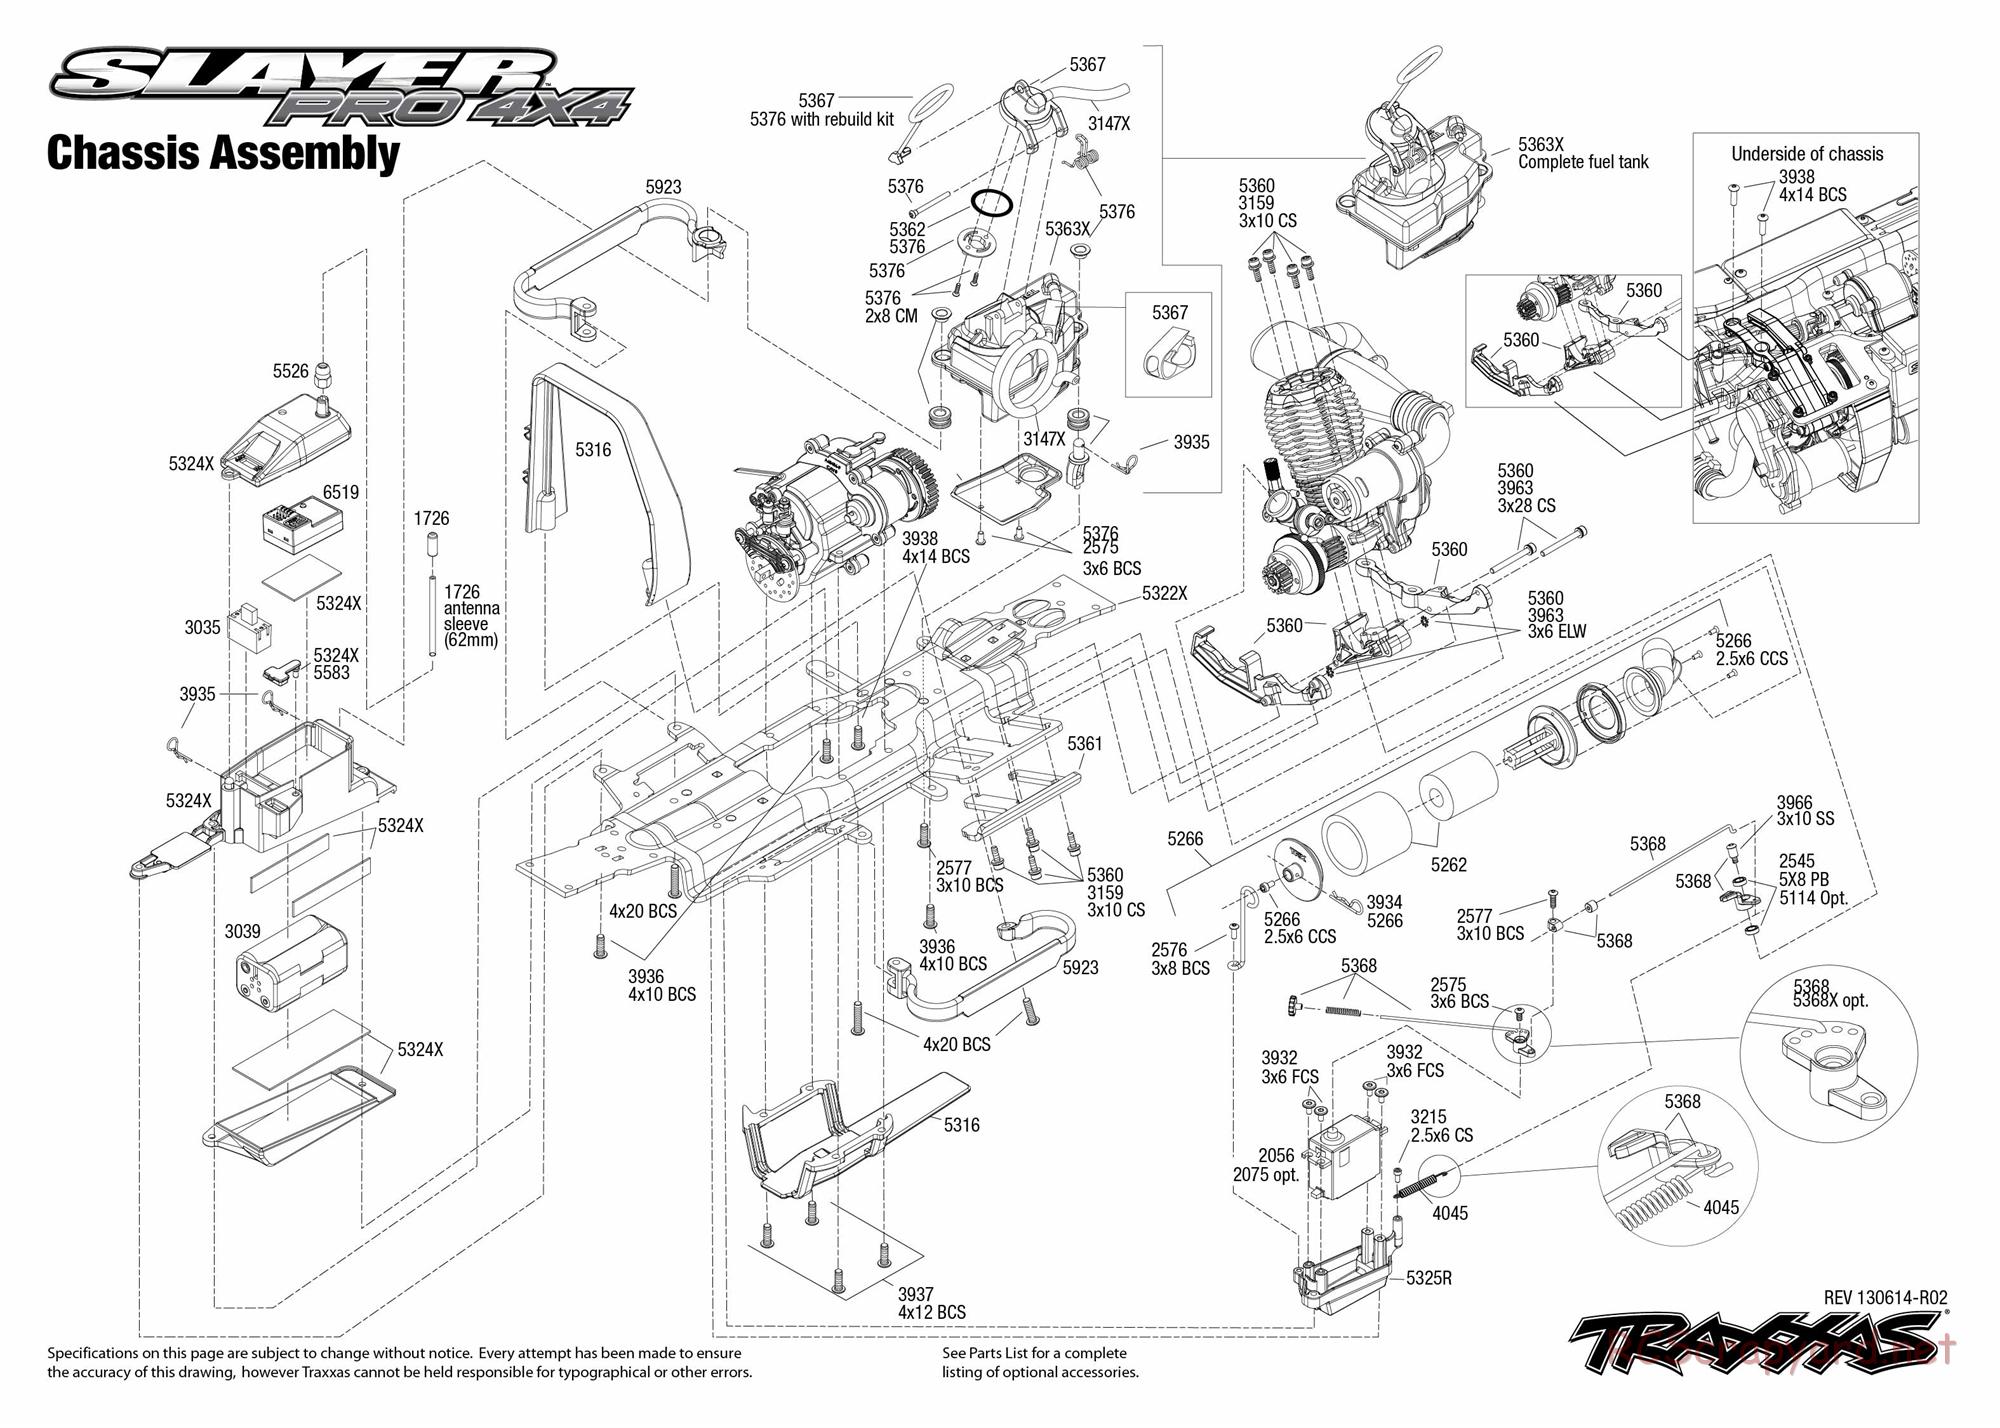 Traxxas - Slayer Pro 4x4 (2012) - Exploded Views - Page 1